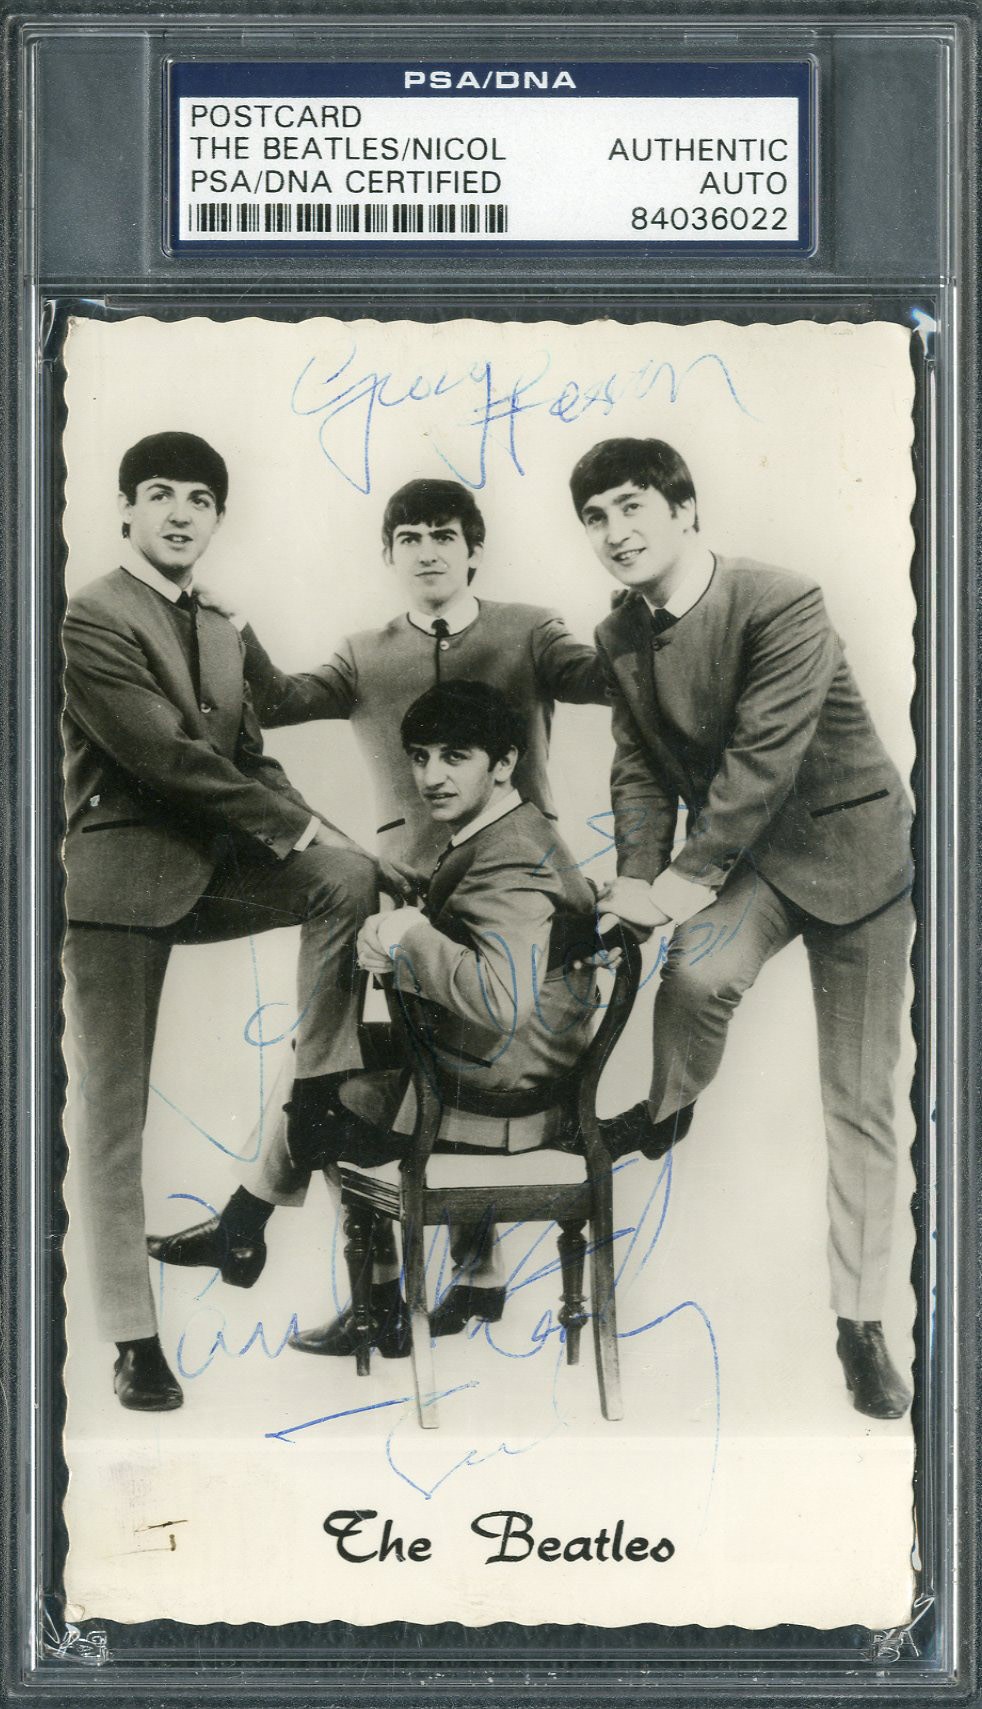 - Ultra Rare 1964 Beatles Signed First World Tour Postcard with Jimmie Nicol (PSA)